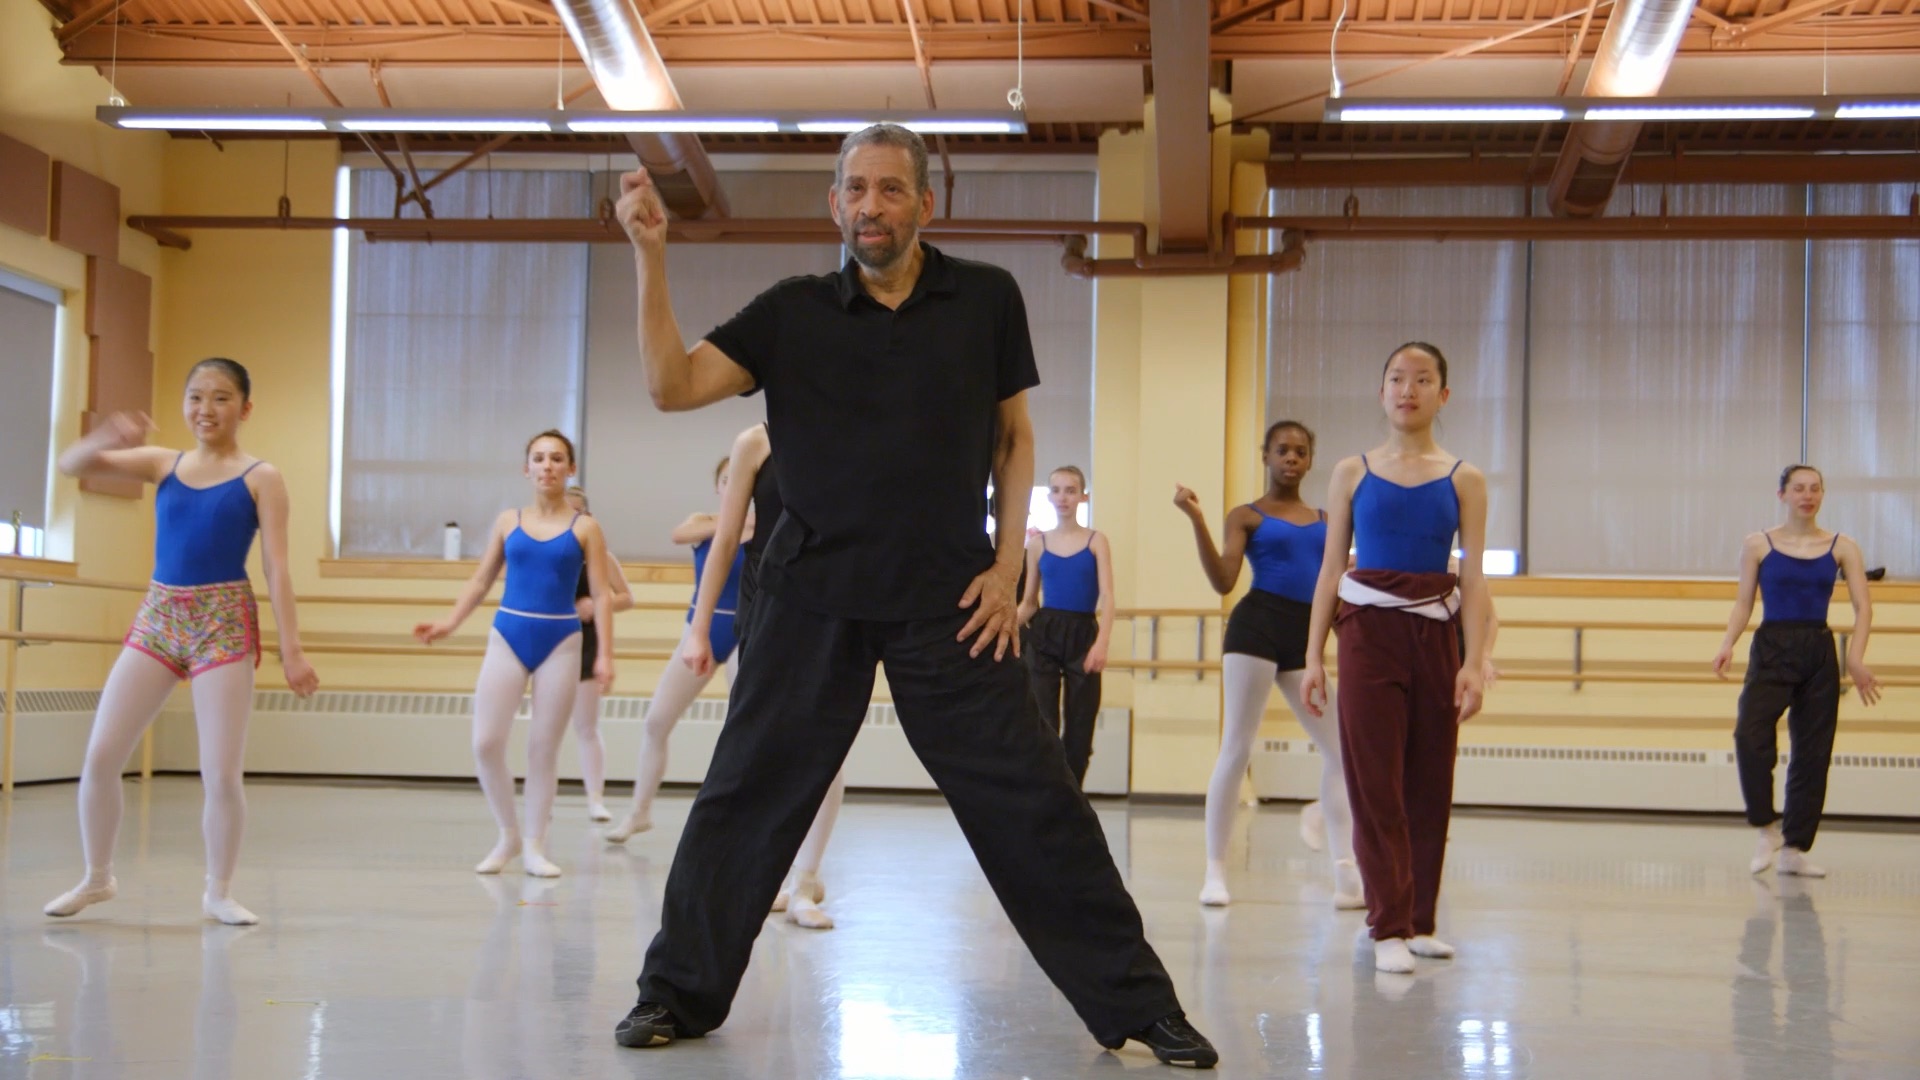 Hines, wearing an all-black outfit and tap shoes, stands at the front of a dance studio full of young students. His legs are in a wide second position, and his right hand is raised, fingers mid-snap.